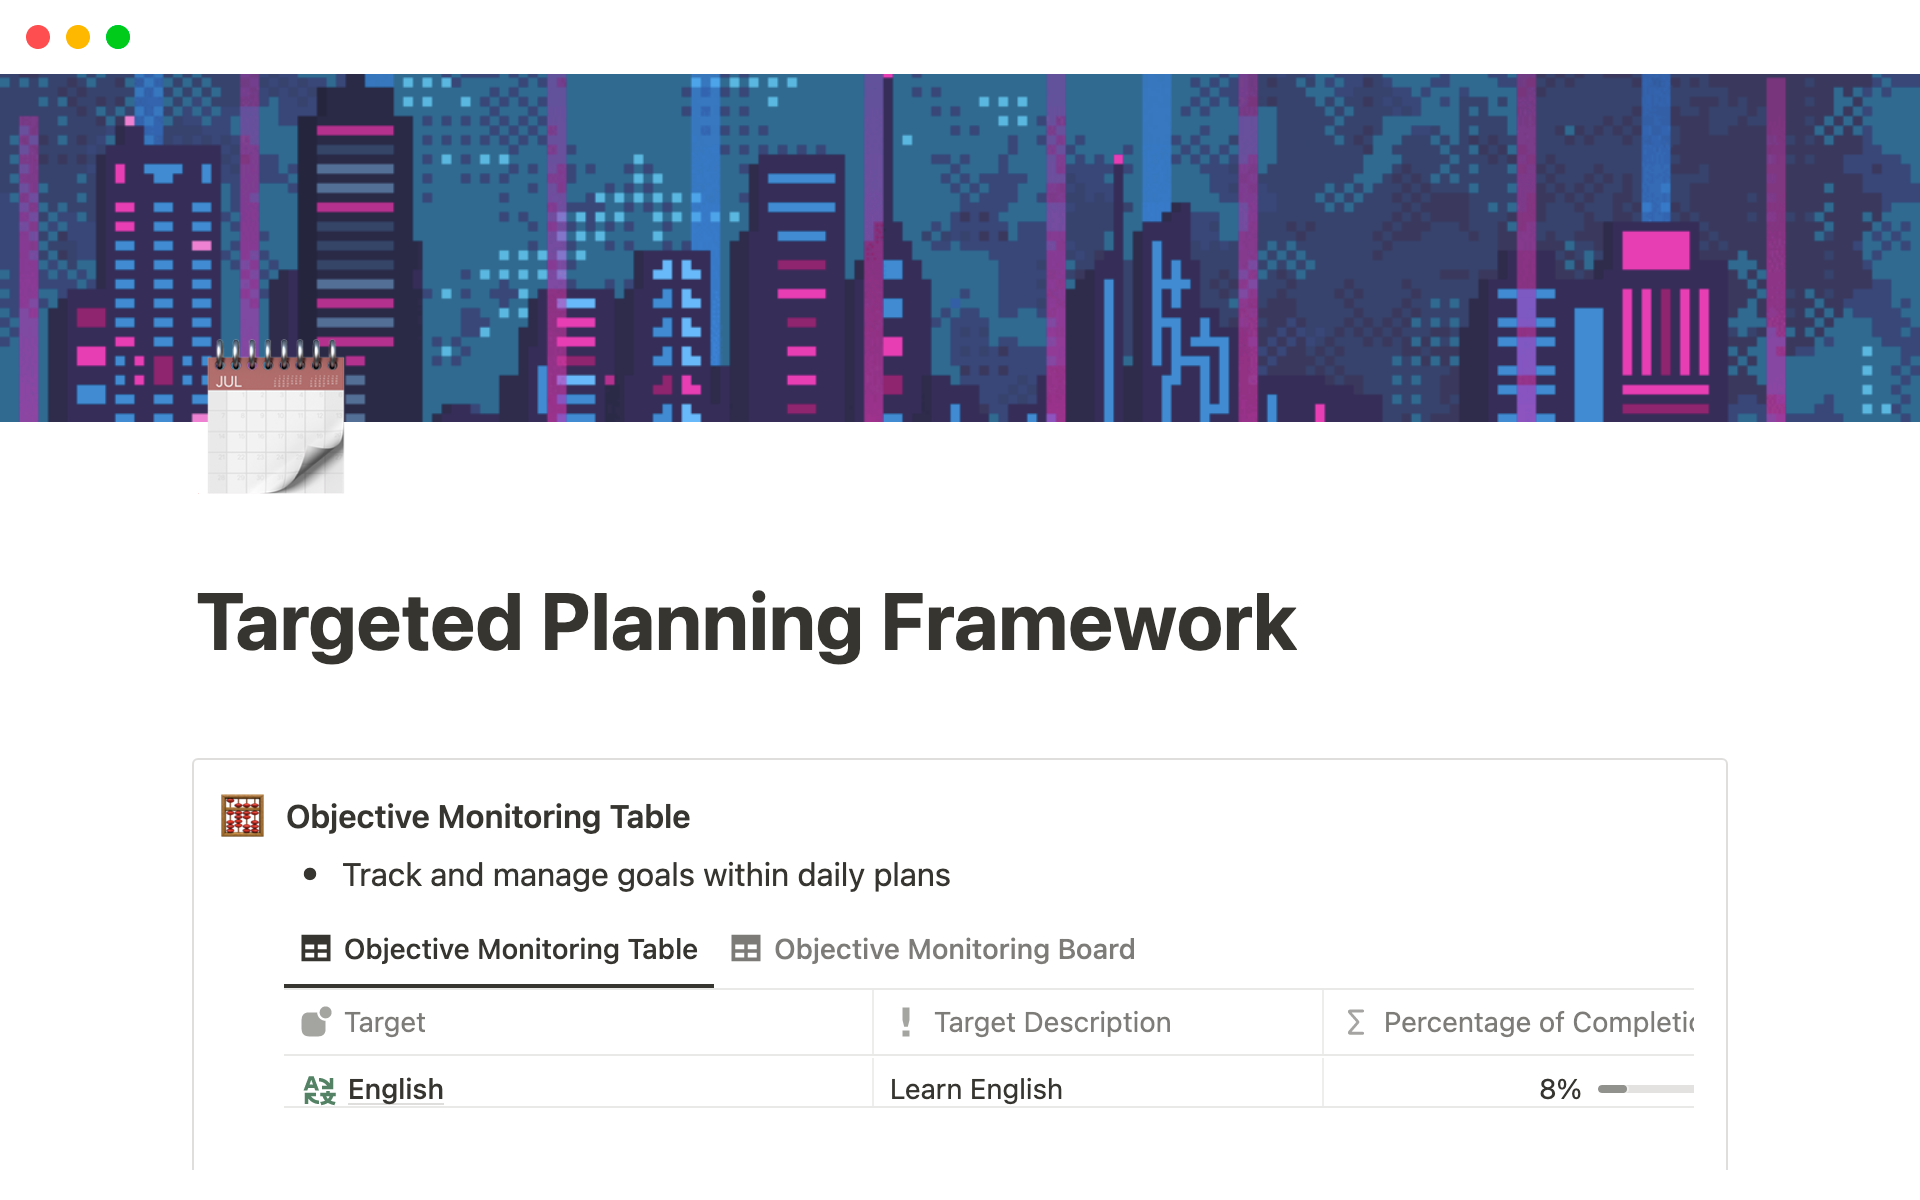 Targeted Planning Framework is an application that helps you set goals, track your progress, and manage your daily schedule.